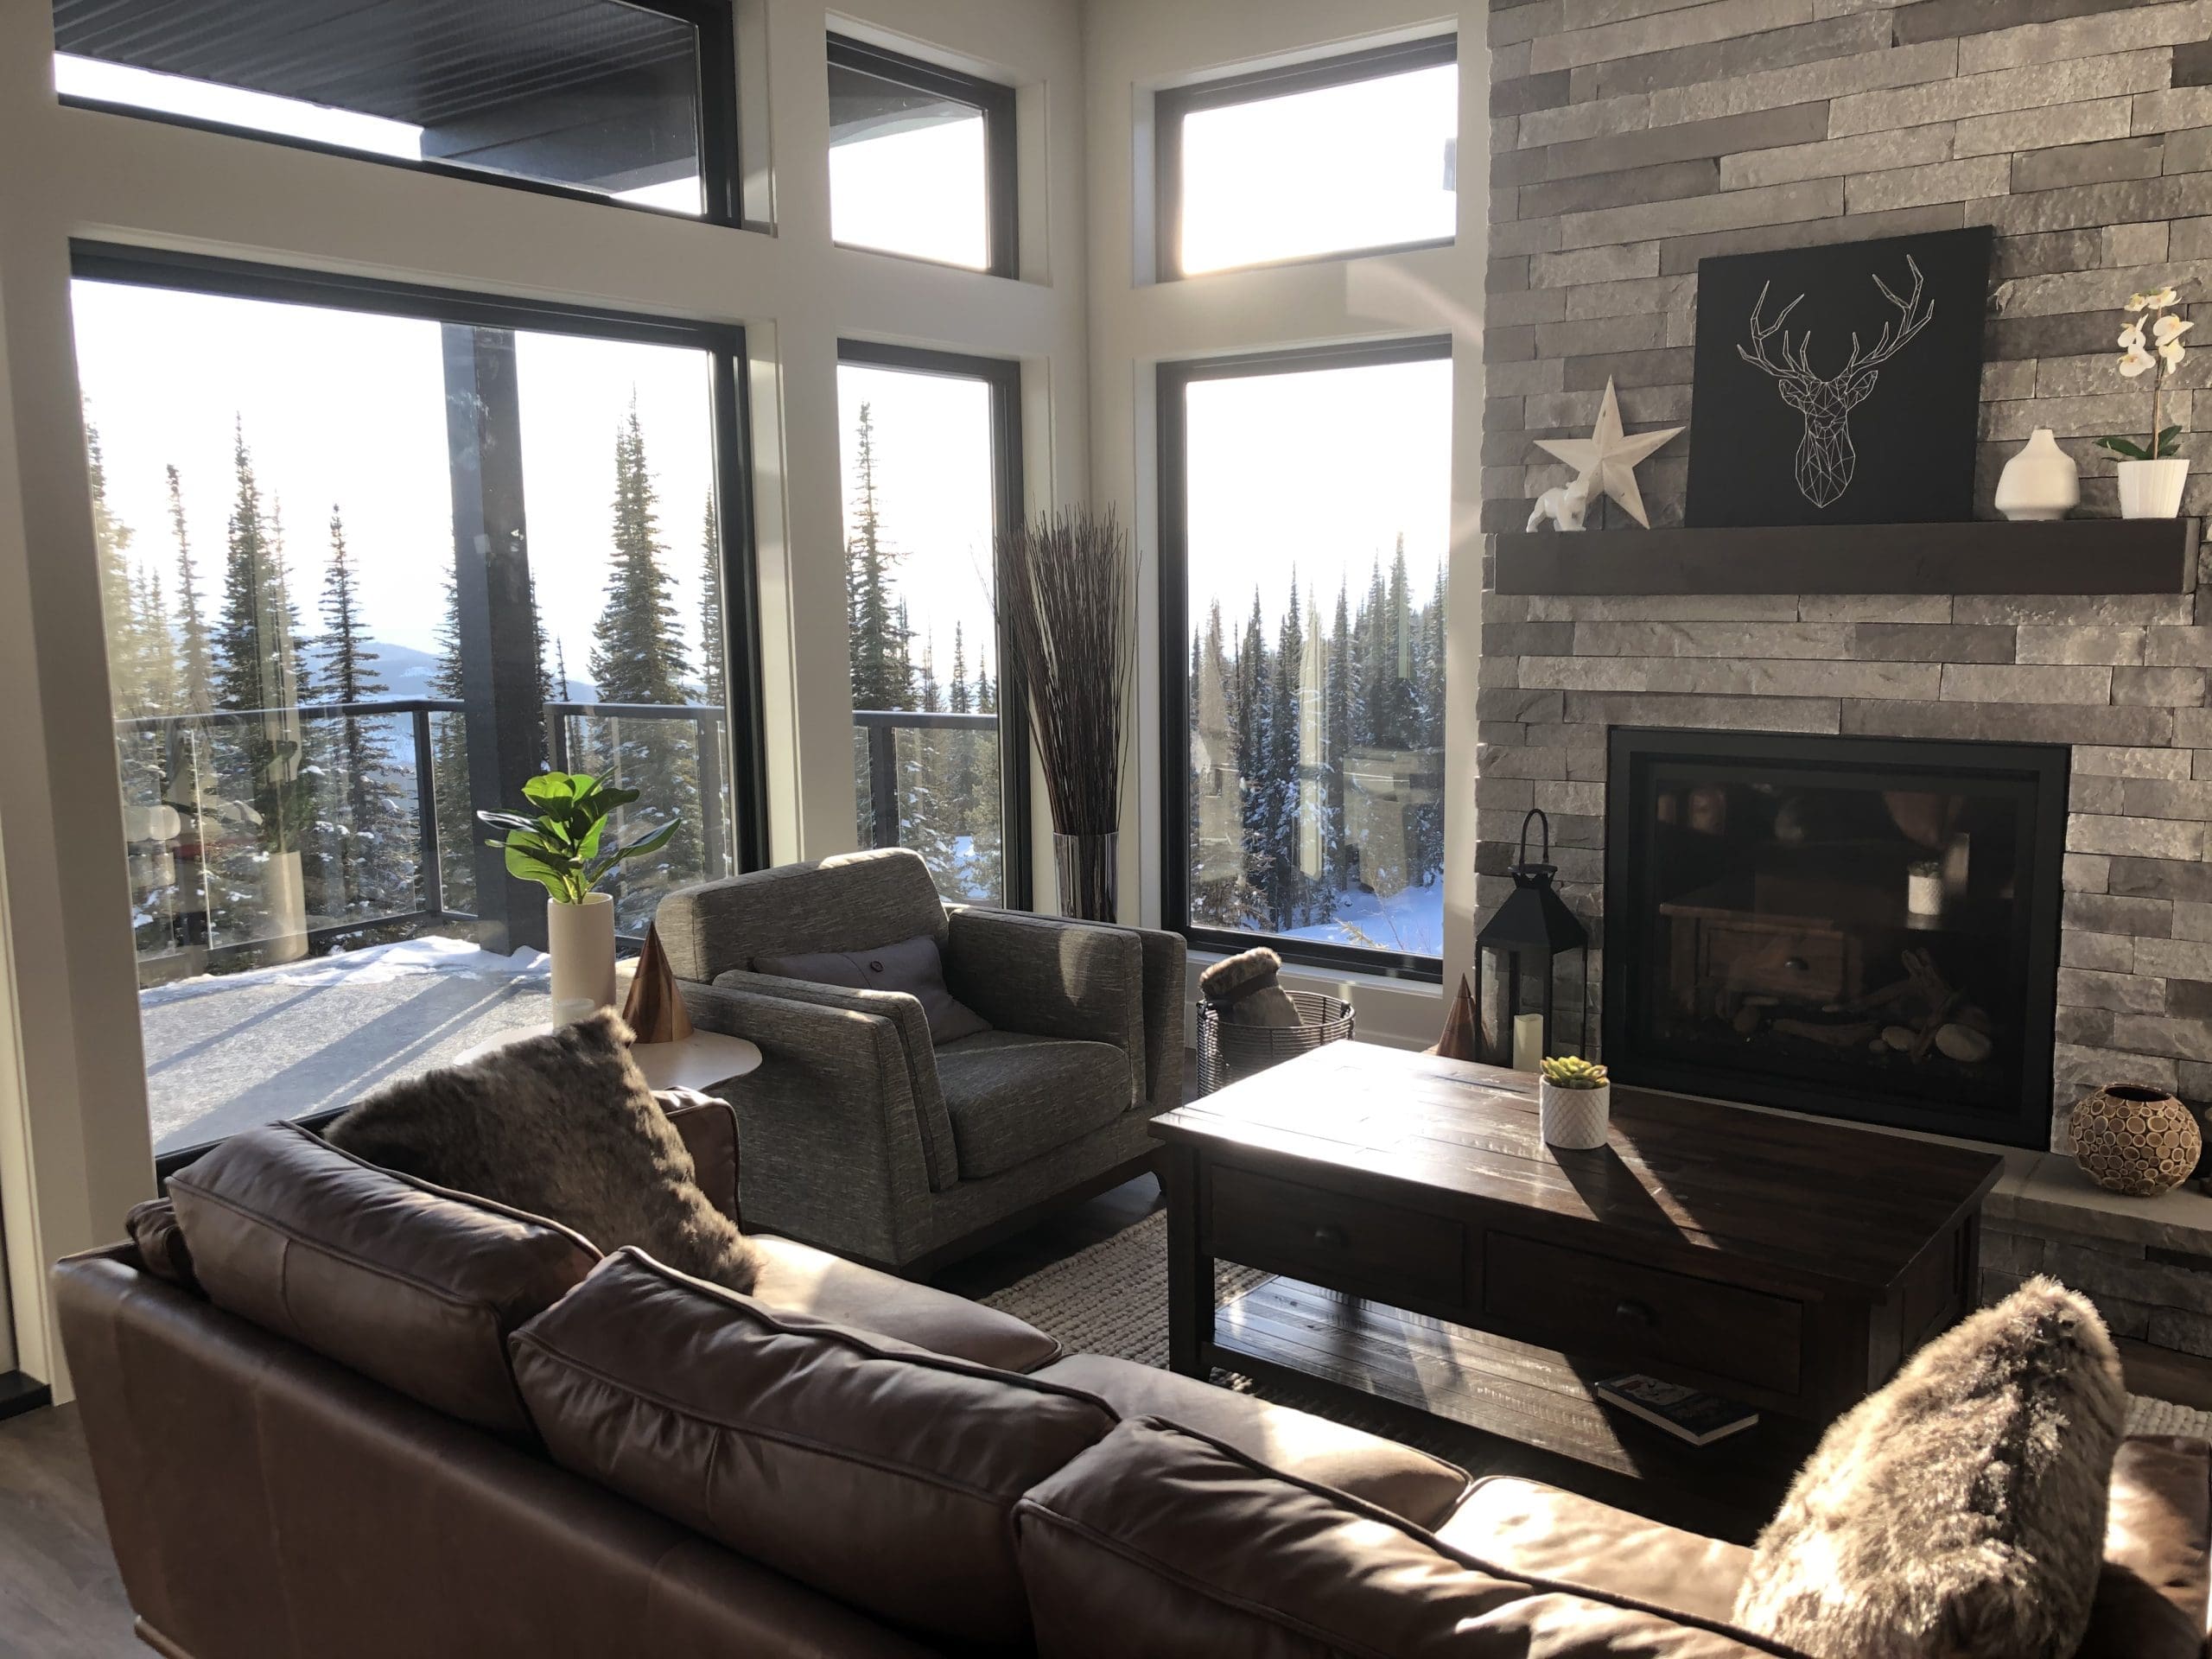 Living room of home with high ceilings, large bright windows with incredible valley and mountain views. Gas fireplace, private hot tub, laundry, lower level TV room with video games, large ski room that leads right out to the skiway from the home.